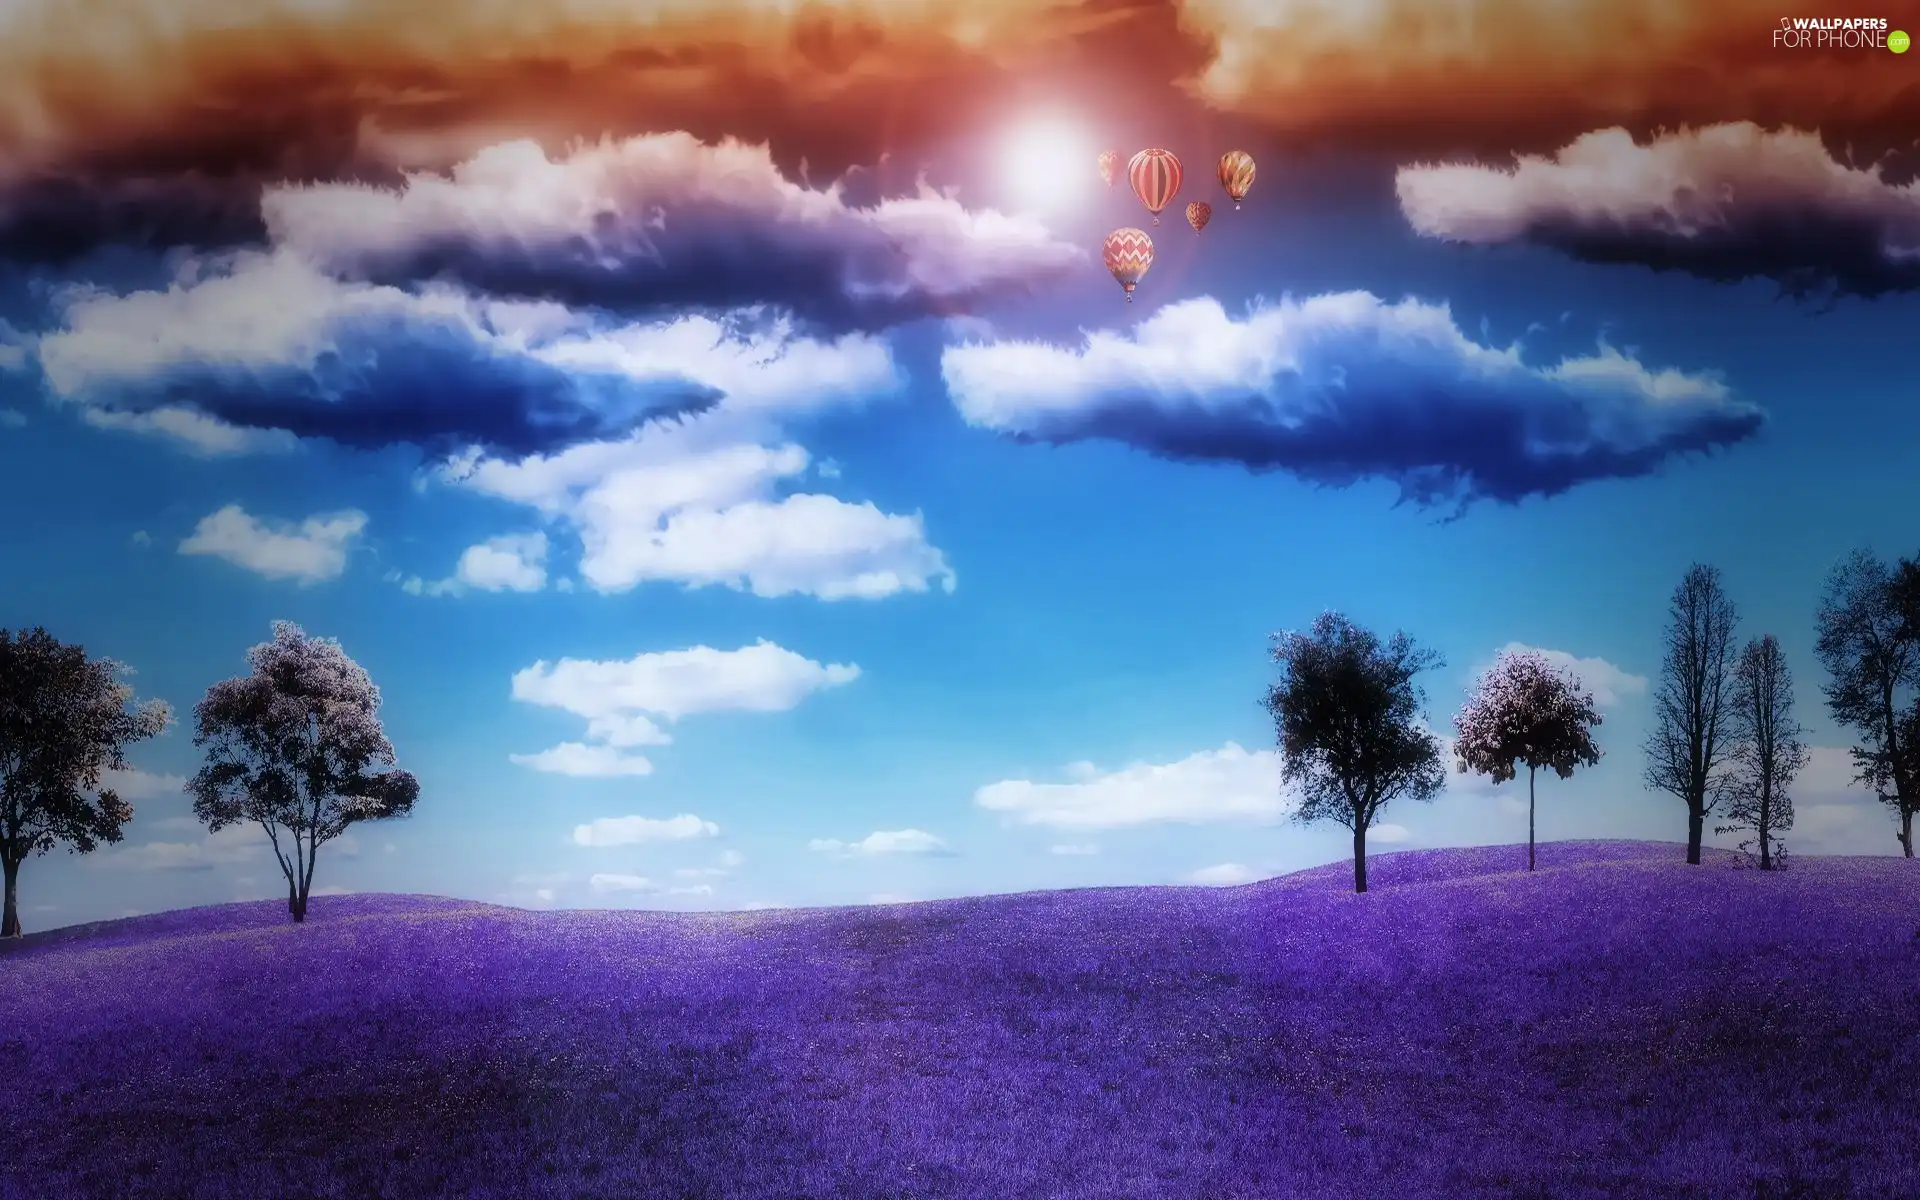 Violet, clouds, Balloons, Meadow